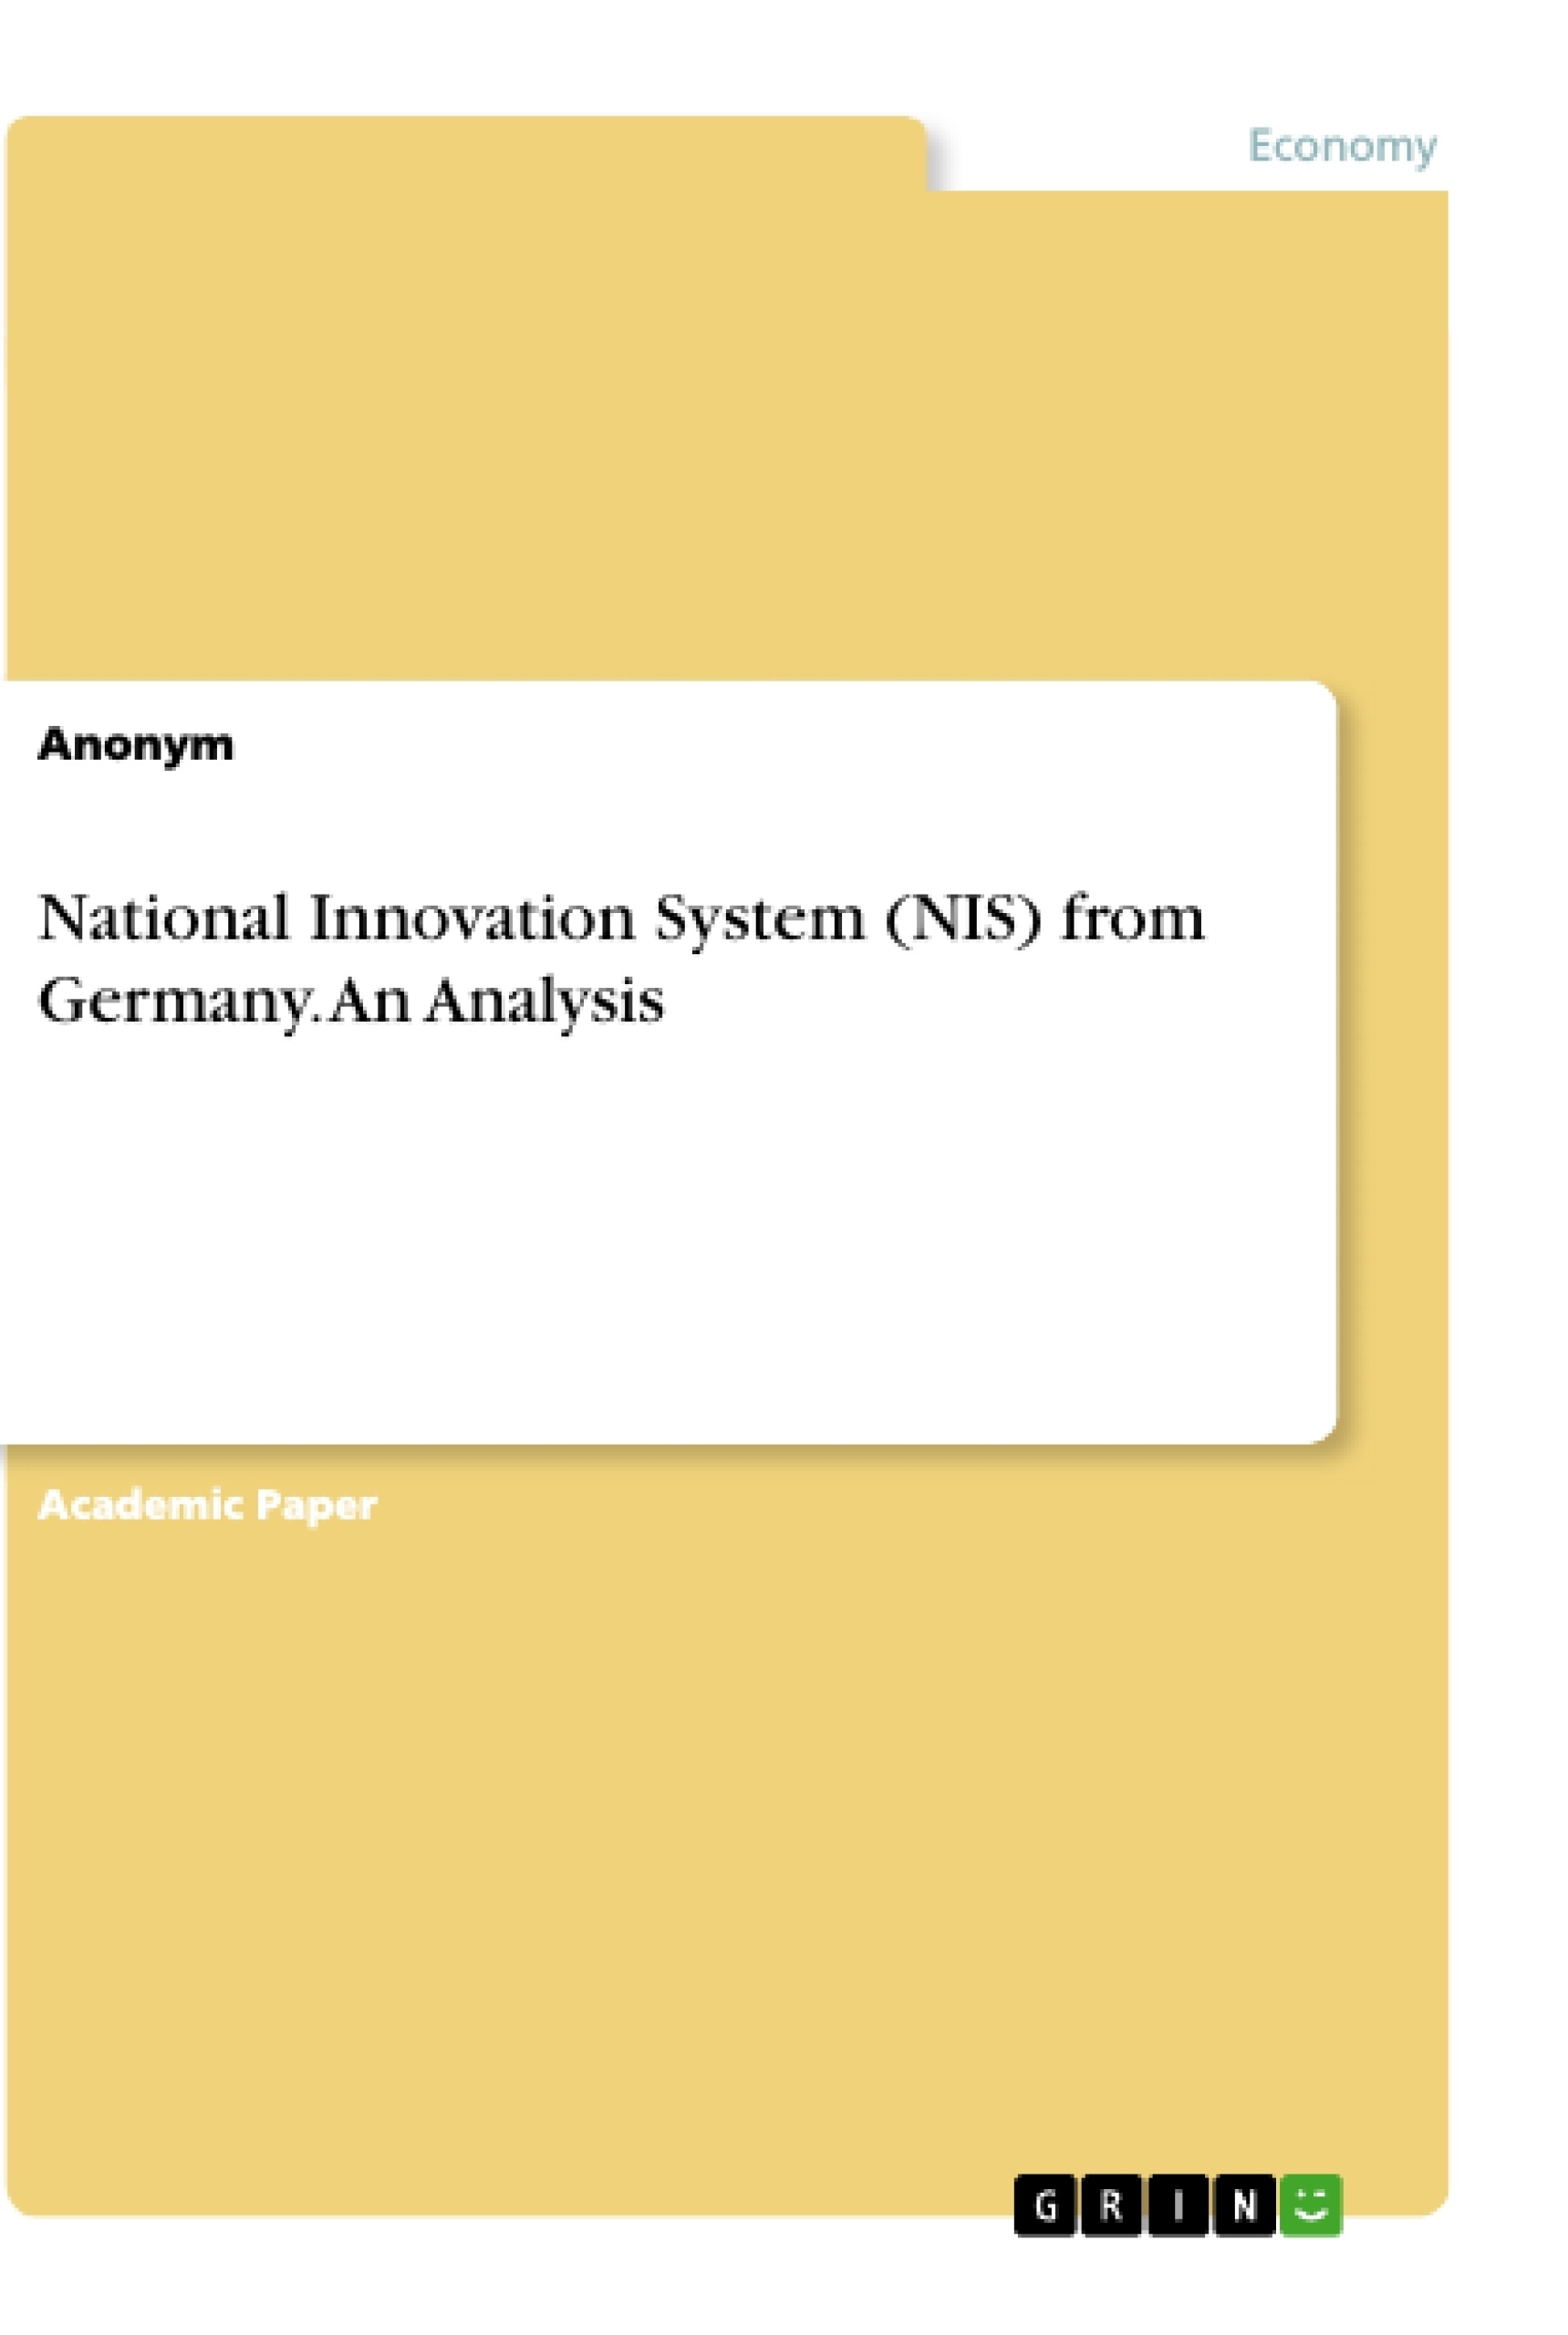 Title: National Innovation System (NIS) from Germany. An Analysis